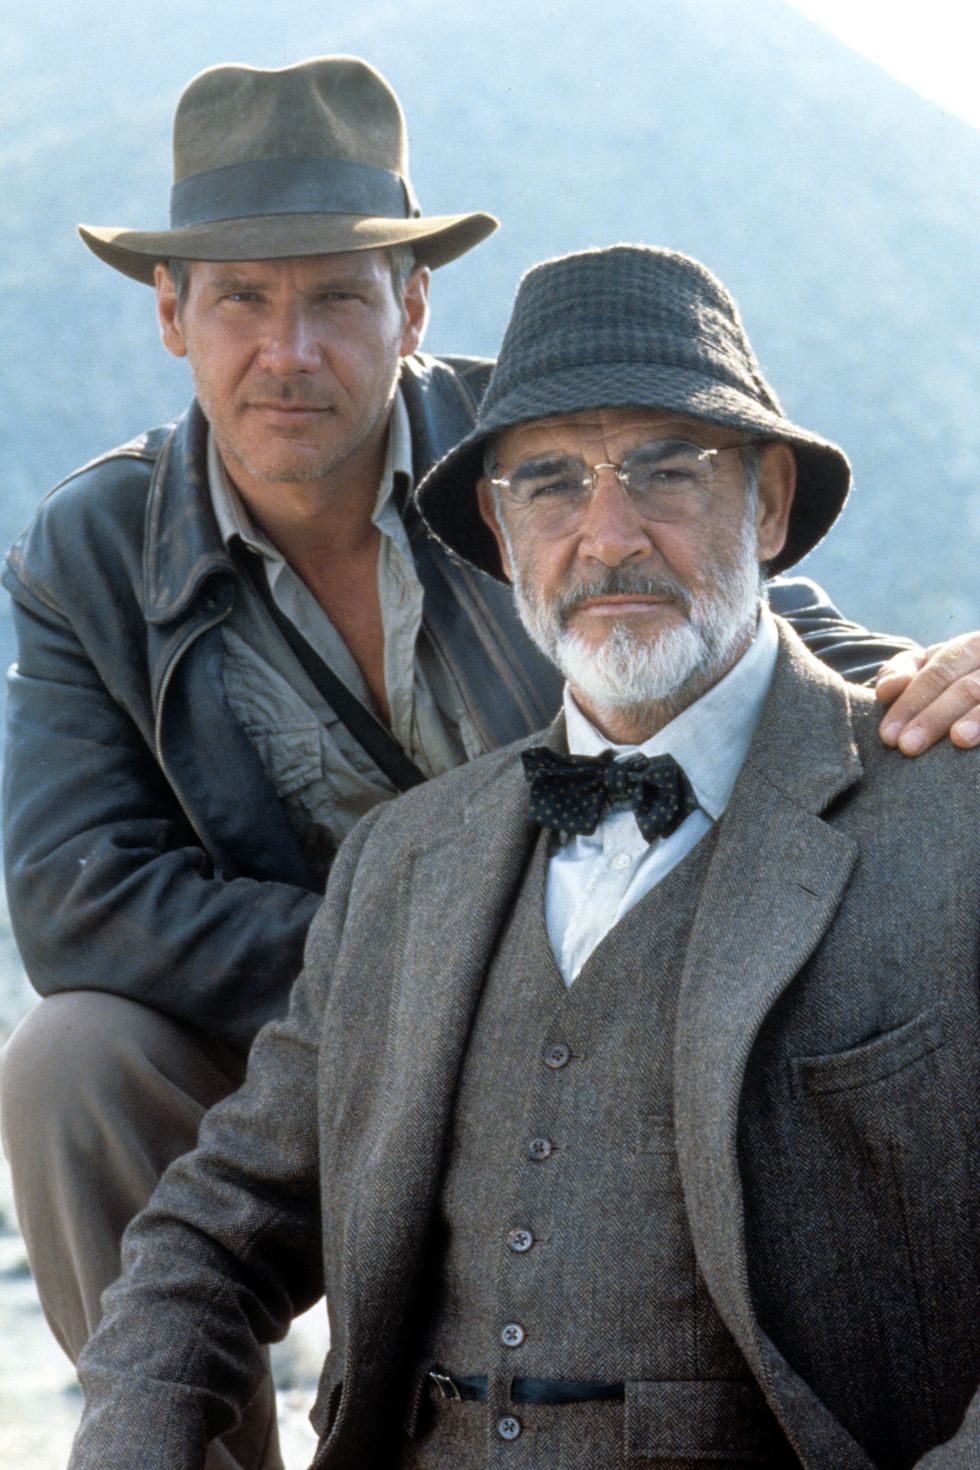 harrison ford and sean connery in 'indiana jones and the last crusade'